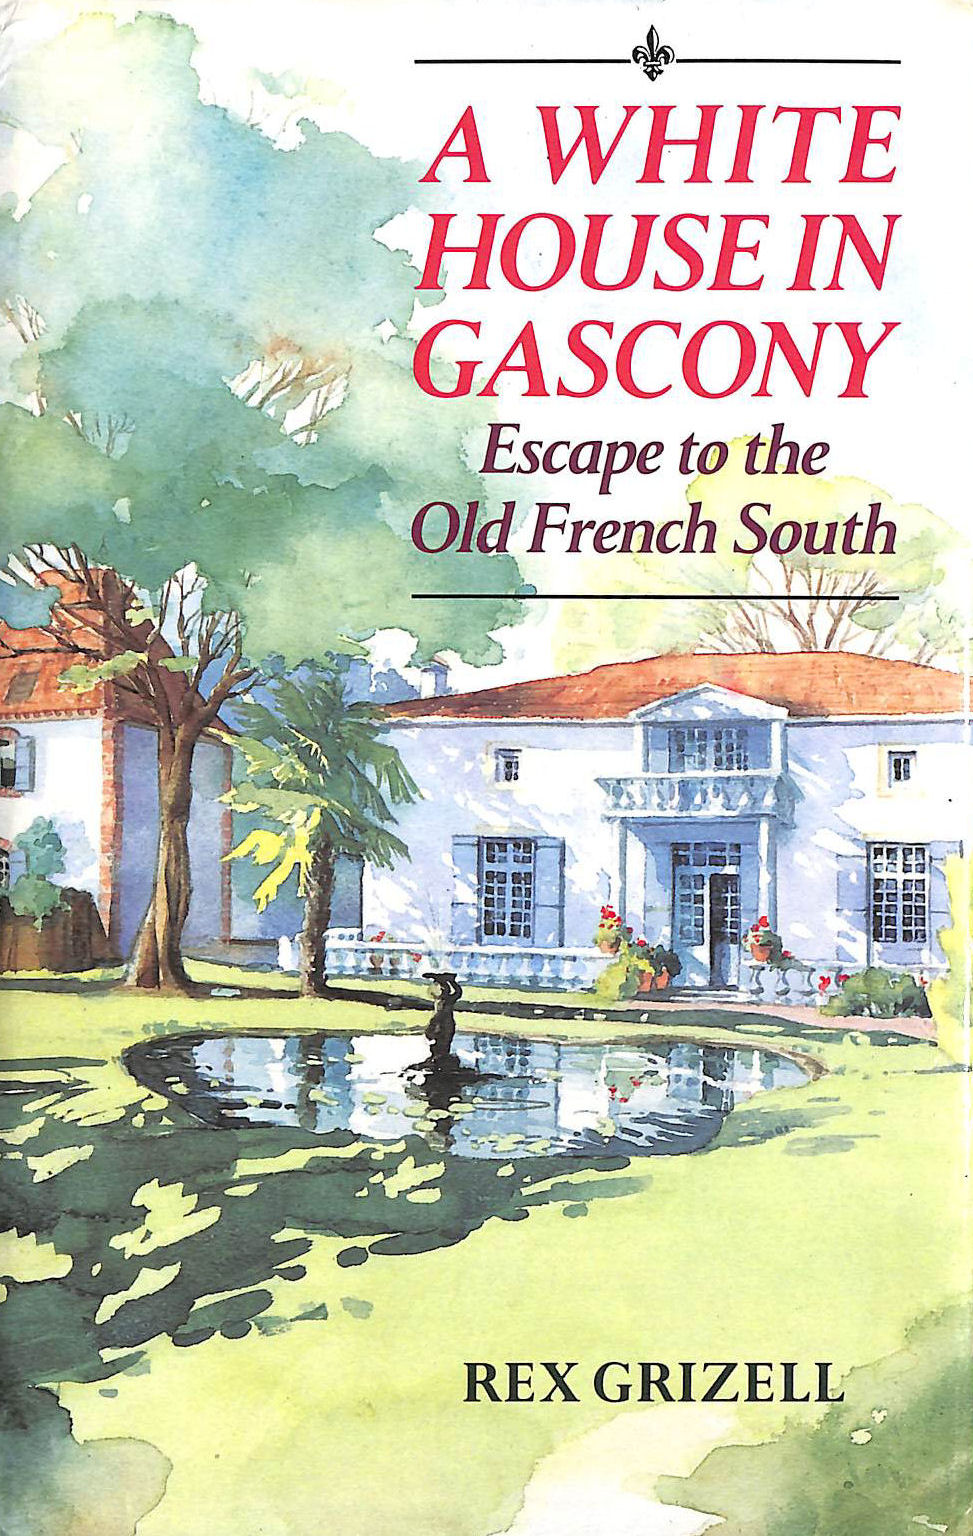 GRIZELL, REX - A White House in Gascony: Escape to the Old French South